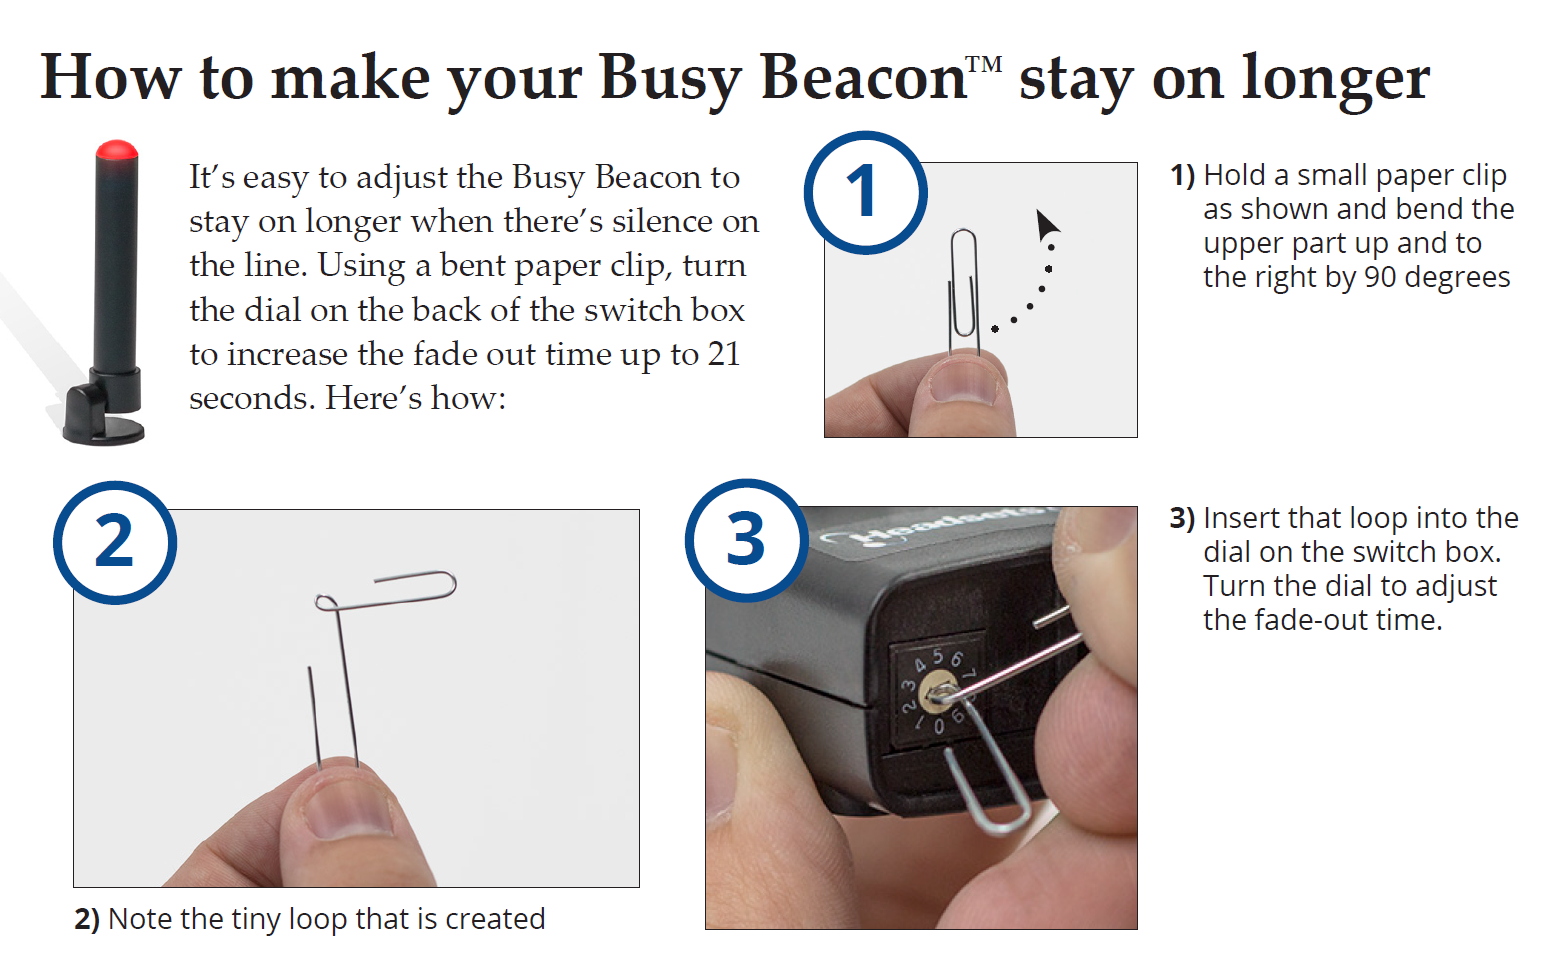 How to make your busy beacon stay on longer